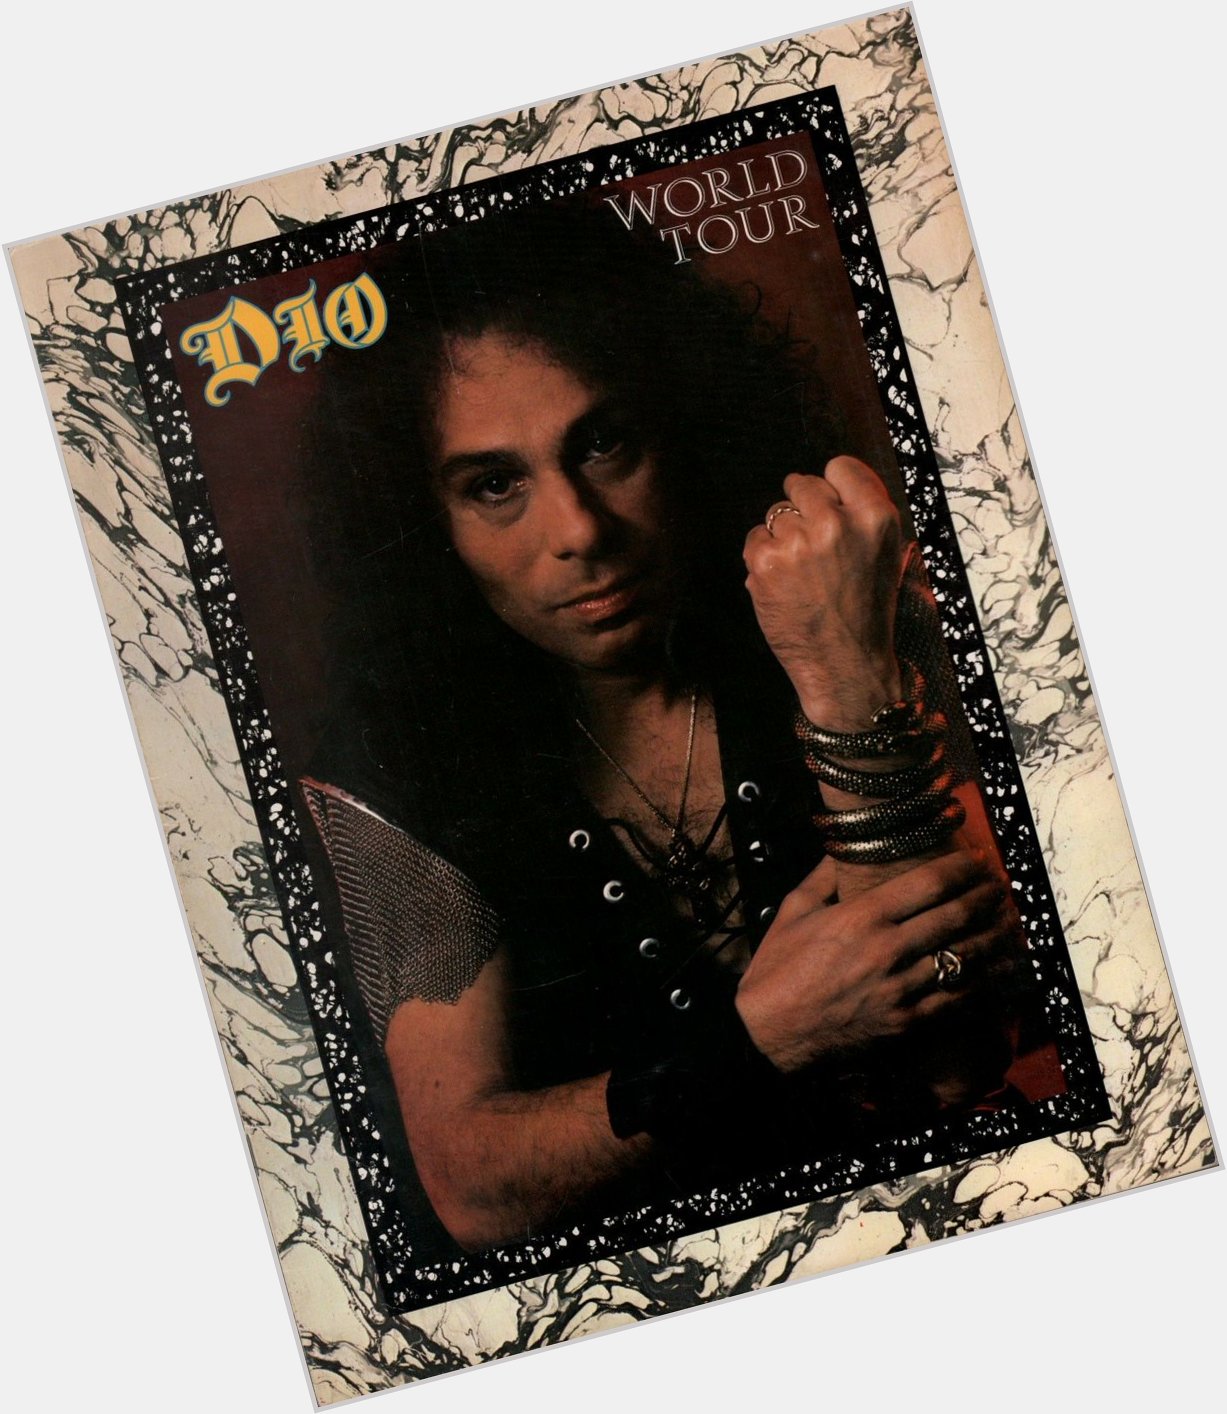 RONNIE JAMES DIO would be 79 today

Happy birthday 